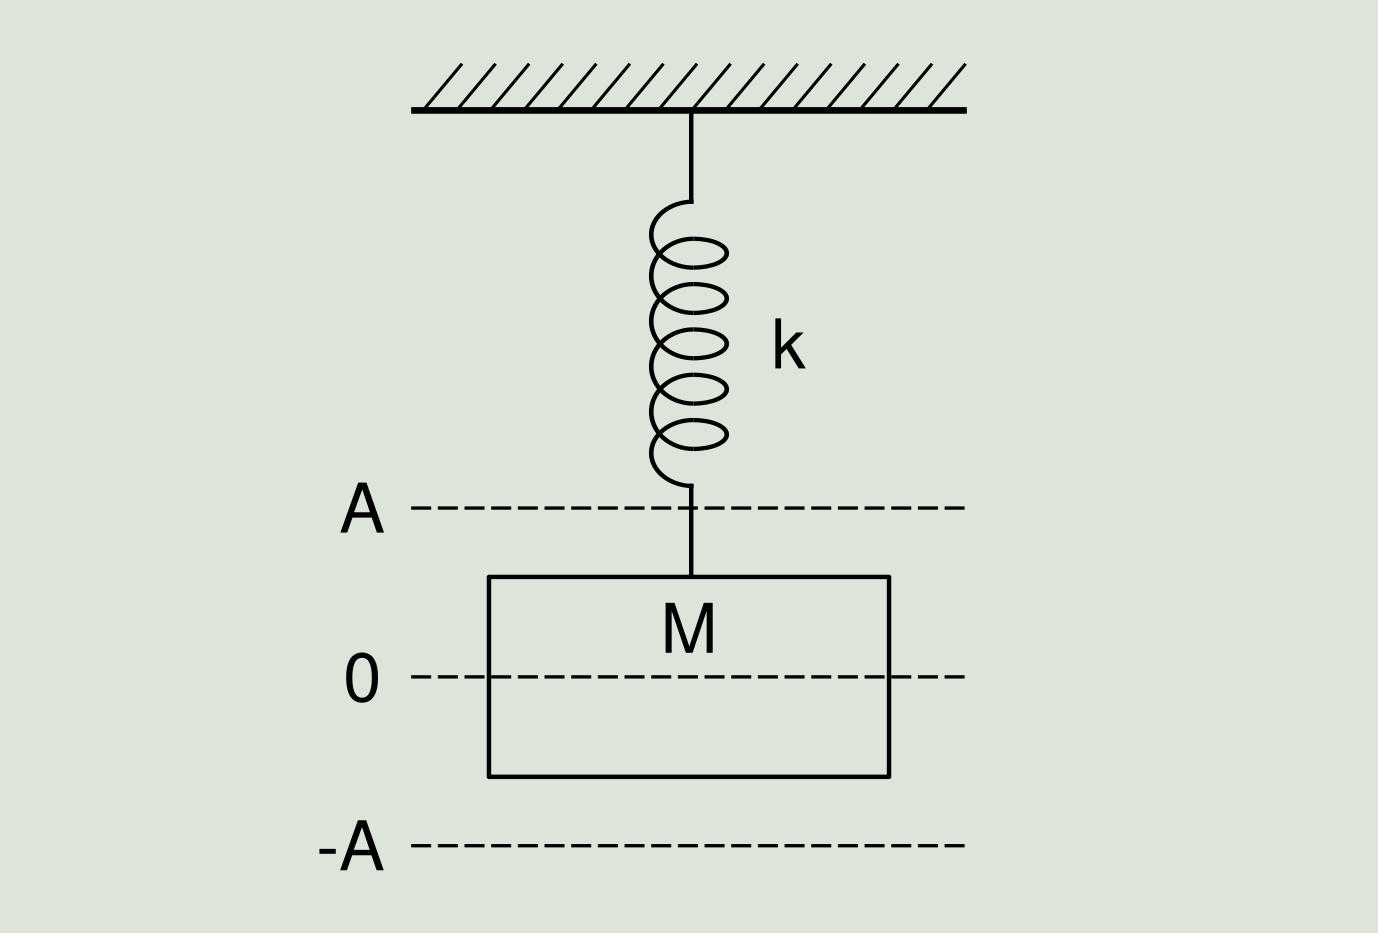 Figure 2.1: Mass suspended on a spring